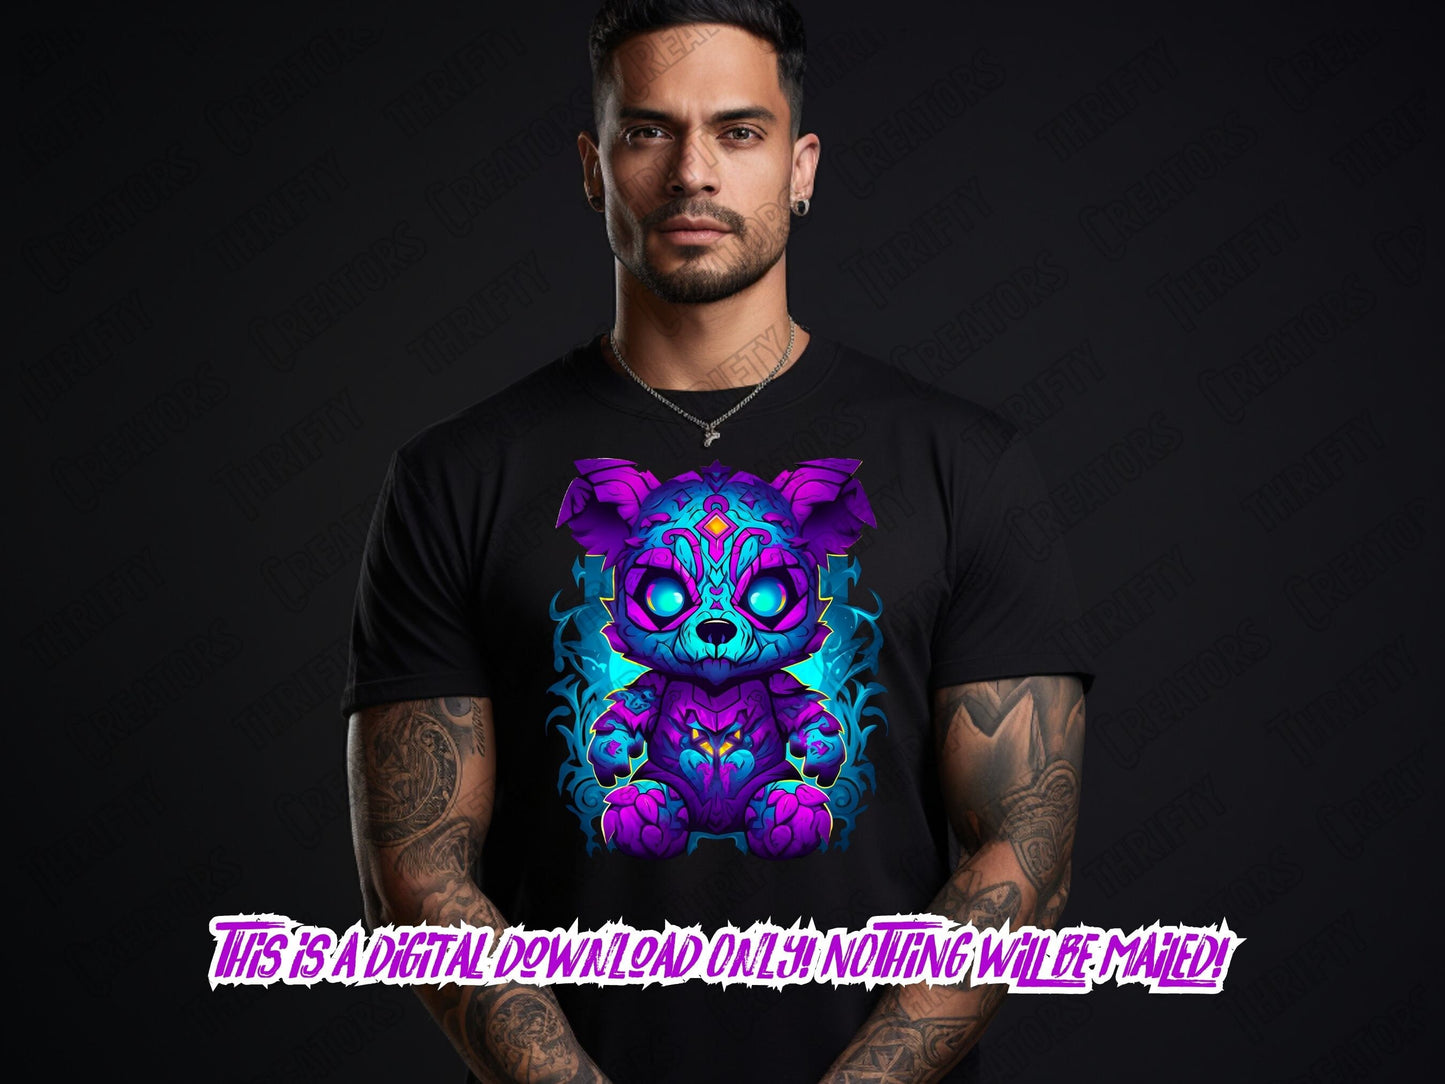 Dtf Png, png for shirt, Teddy Bear png for t-shirt designs, Png for sublimate, shirt designs, hip hop png, dtf designs, Thrifty Creators